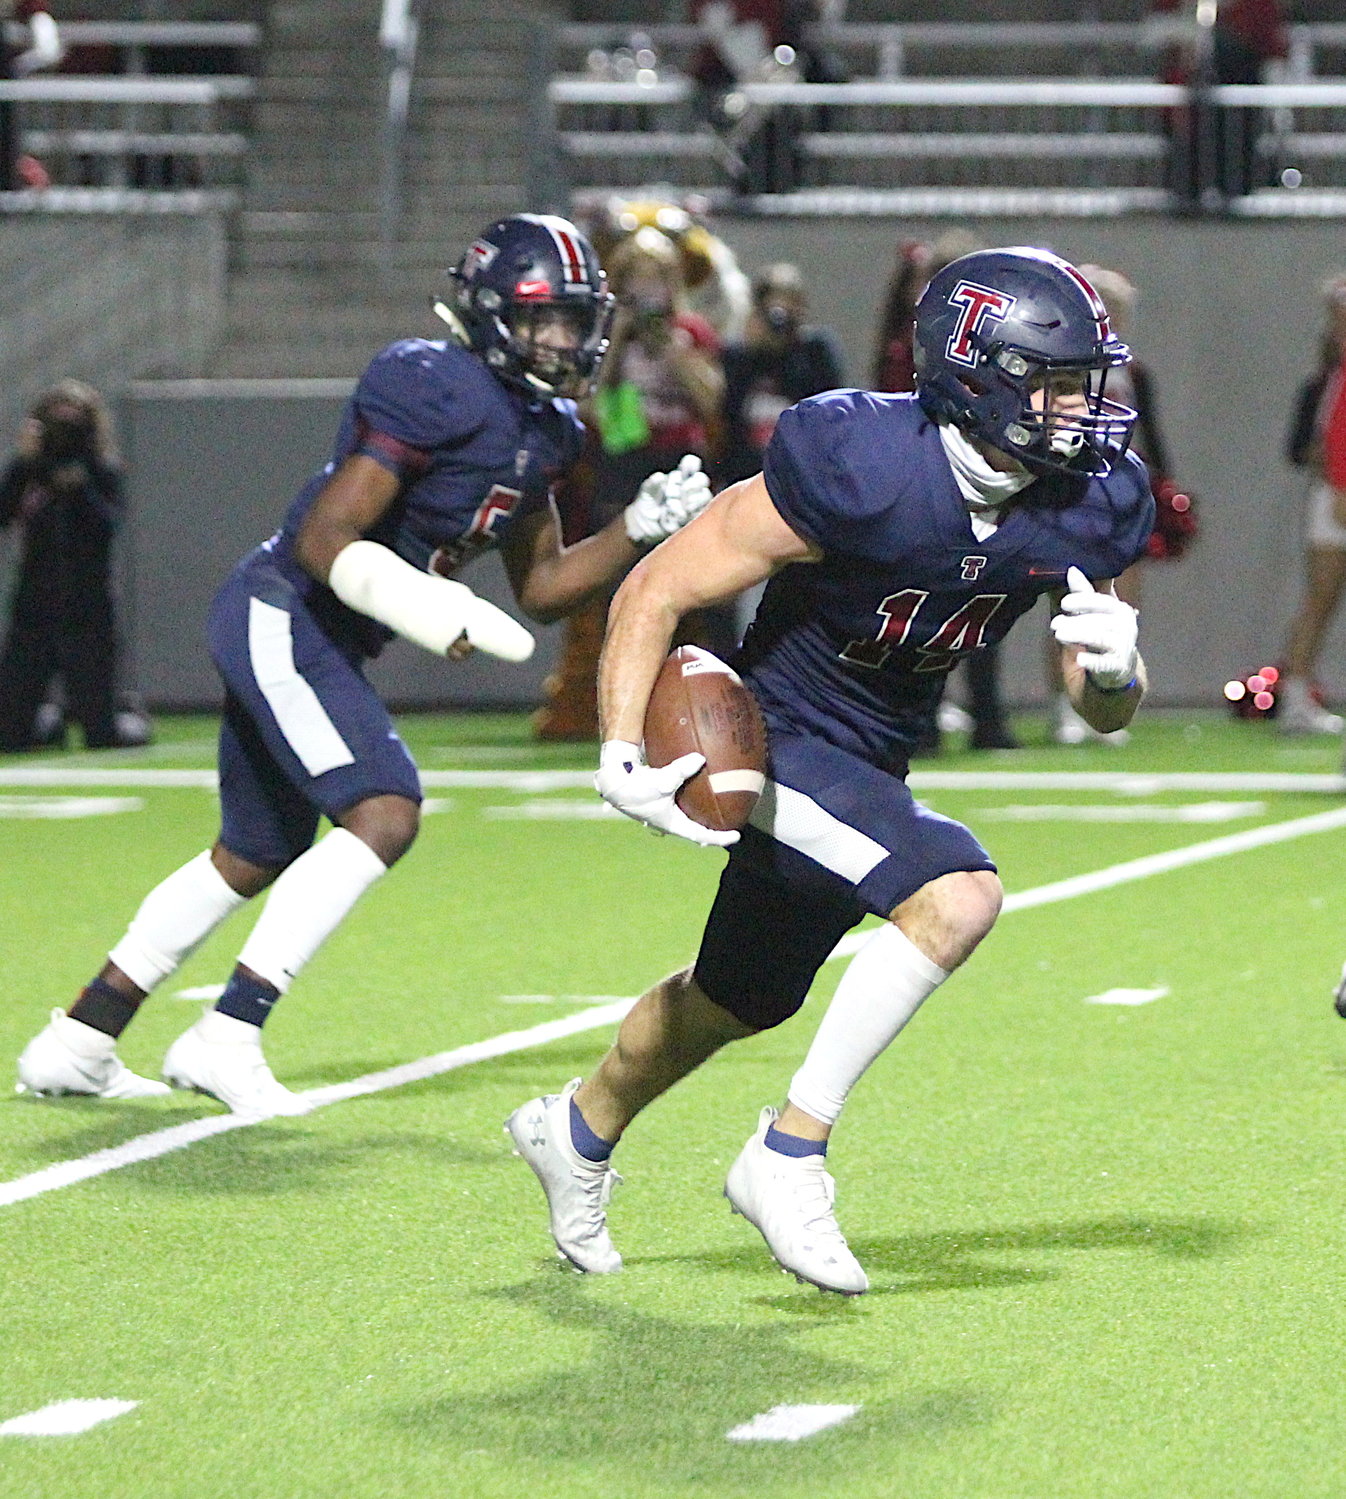 Tompkins senior safety Colby Huerter runs back an interception during a game against Katy earlier this season at Legacy Stadium. Huerter was named District 19-6A’s Defensive Player of the Year.